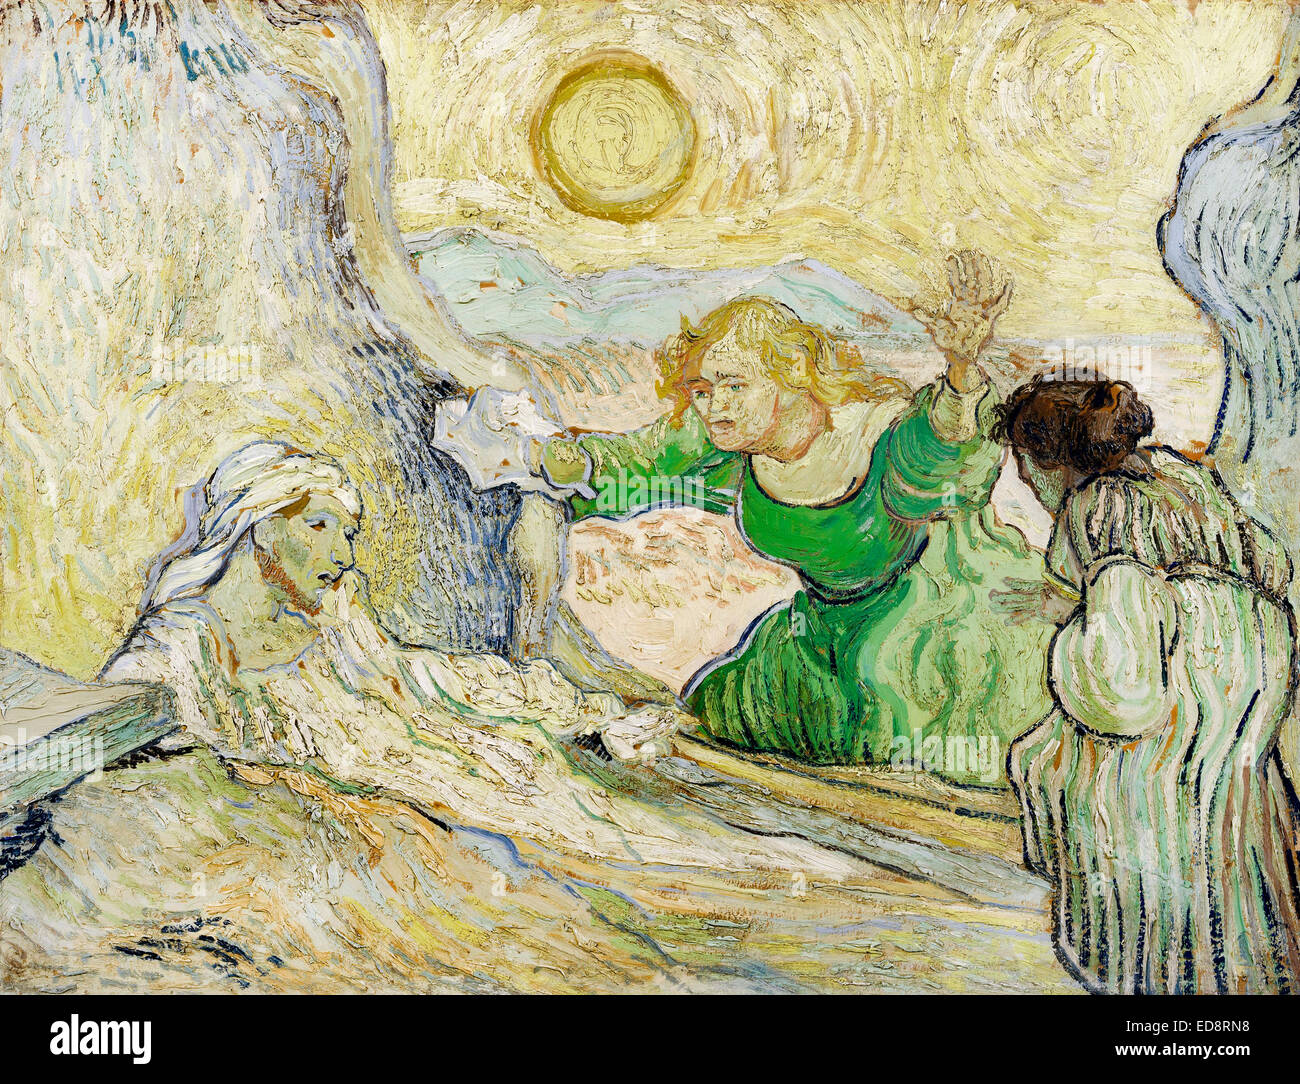 Vincent van Gogh, The Raising of Lazarus after Rembrandt. 1890. Post-Impressionism. Oil on canvas. Van Gogh Museum, Amsterdam Stock Photo